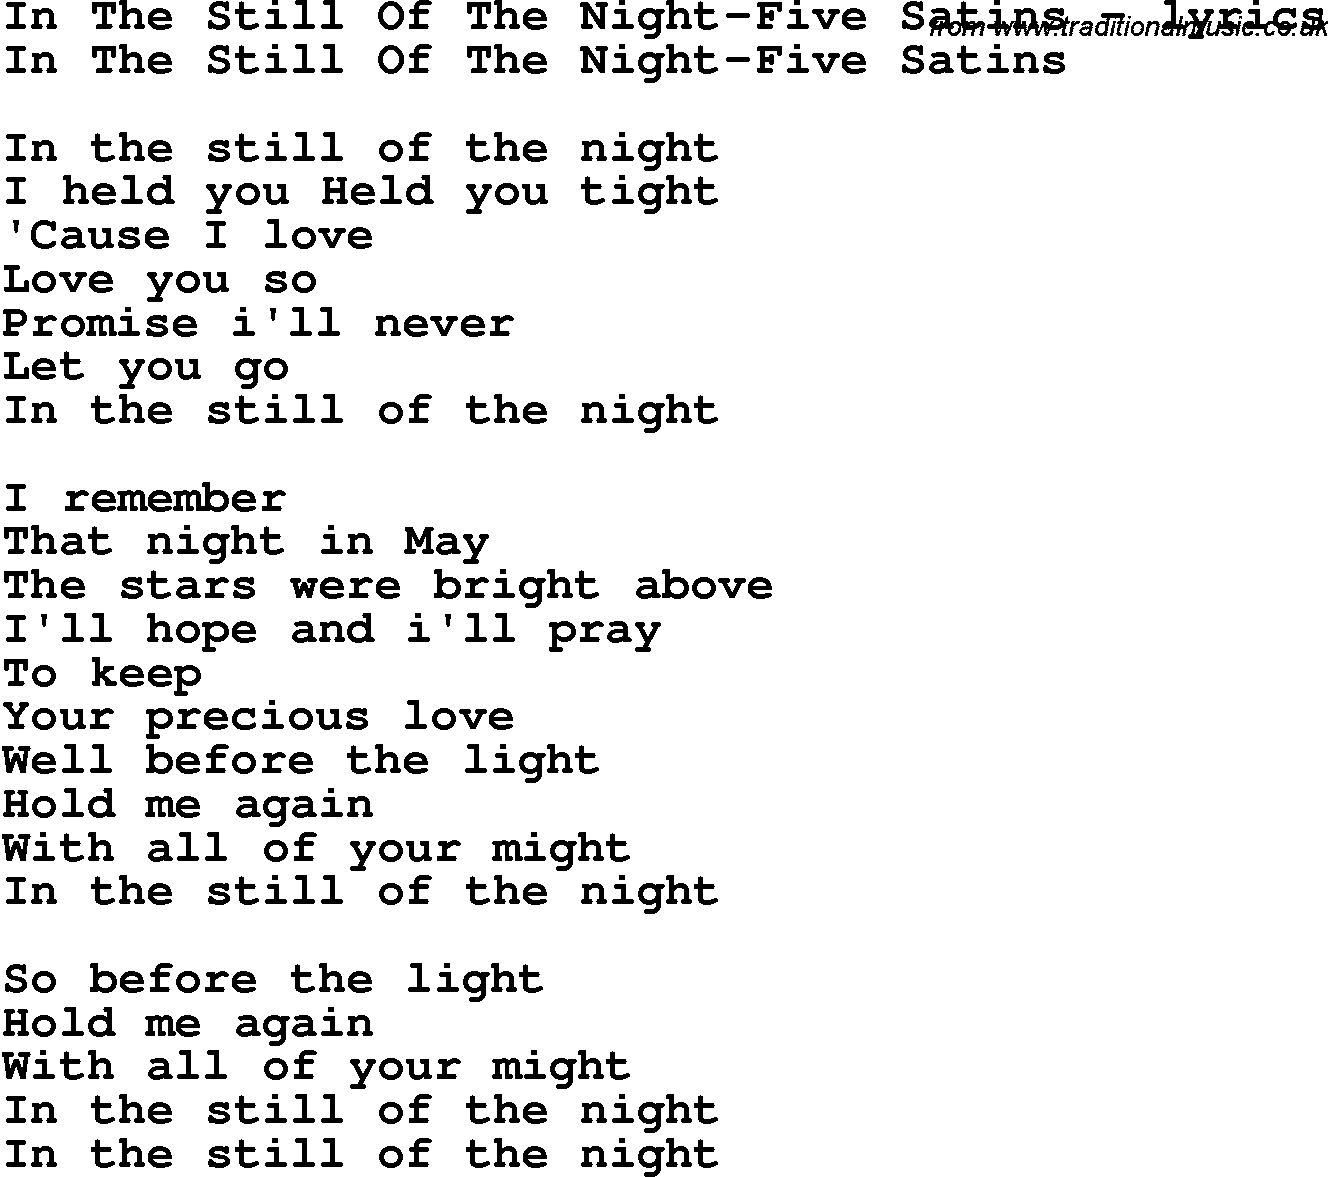 Love Song Lyrics for: In The Still Of The Night-Five Satins